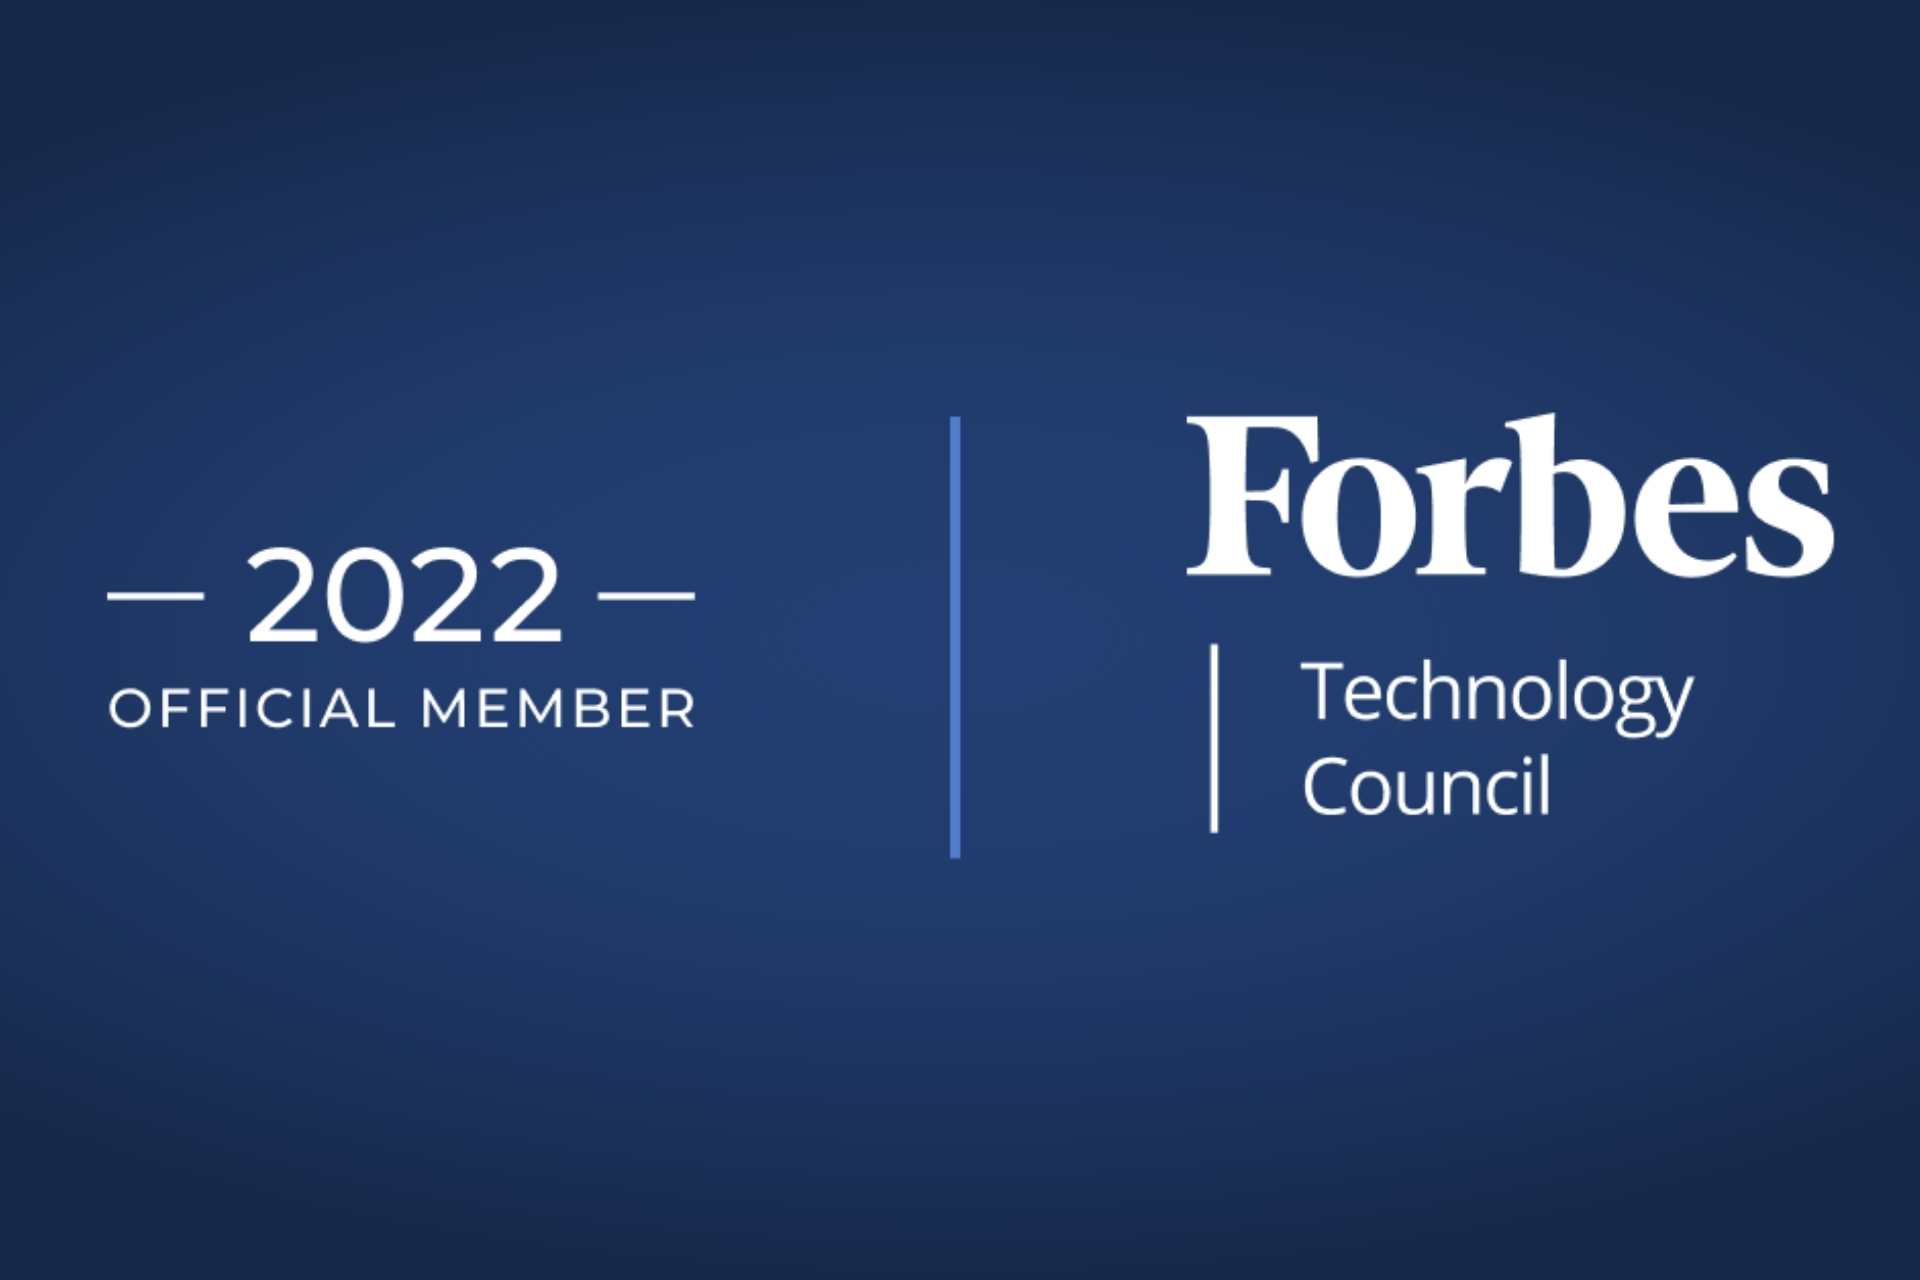 Image recognizing Mateus as an official Forbes Technology Council member.